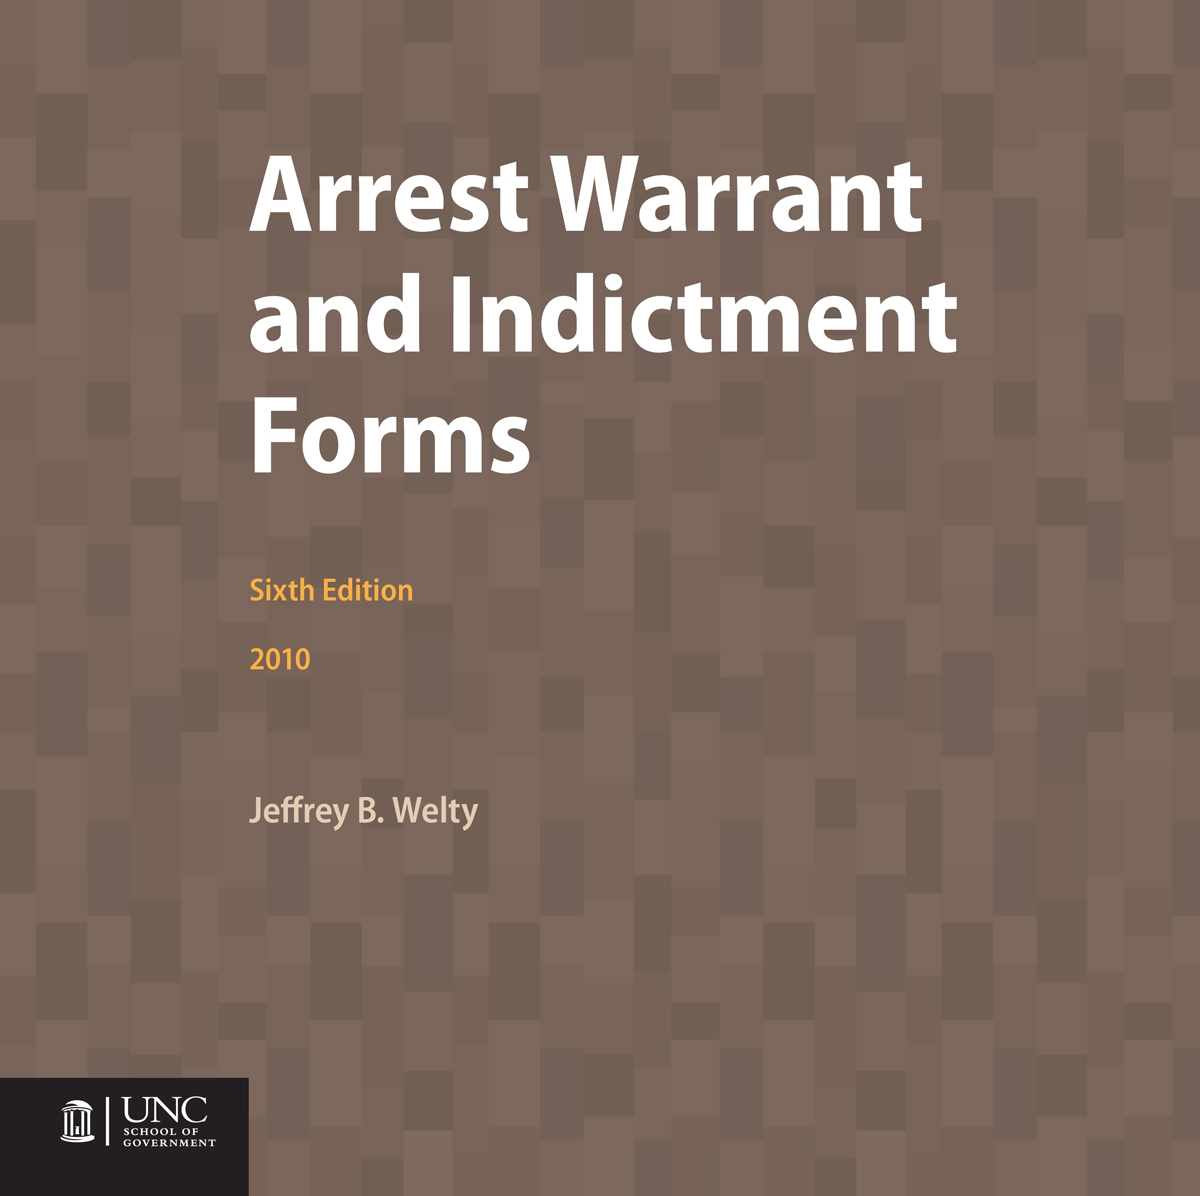 Cover image for Arrest Warrant and Indictment Forms, Sixth Edition, 2010 (Hard Copy Format)